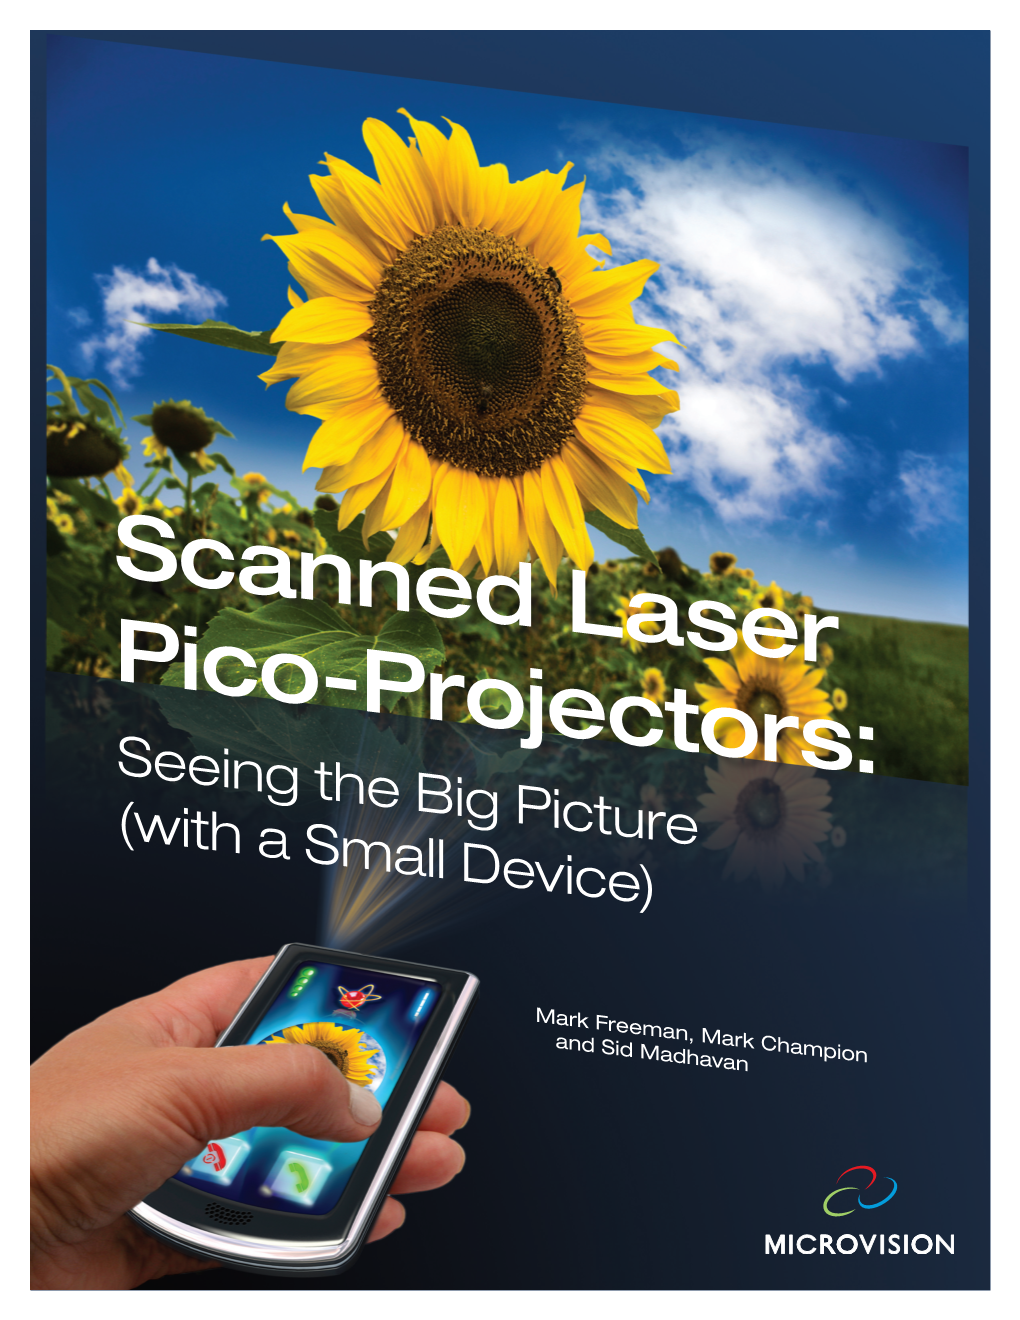 Scanned Laser Pico-Projectors: Seeing the Big Picture (With a Small Device)